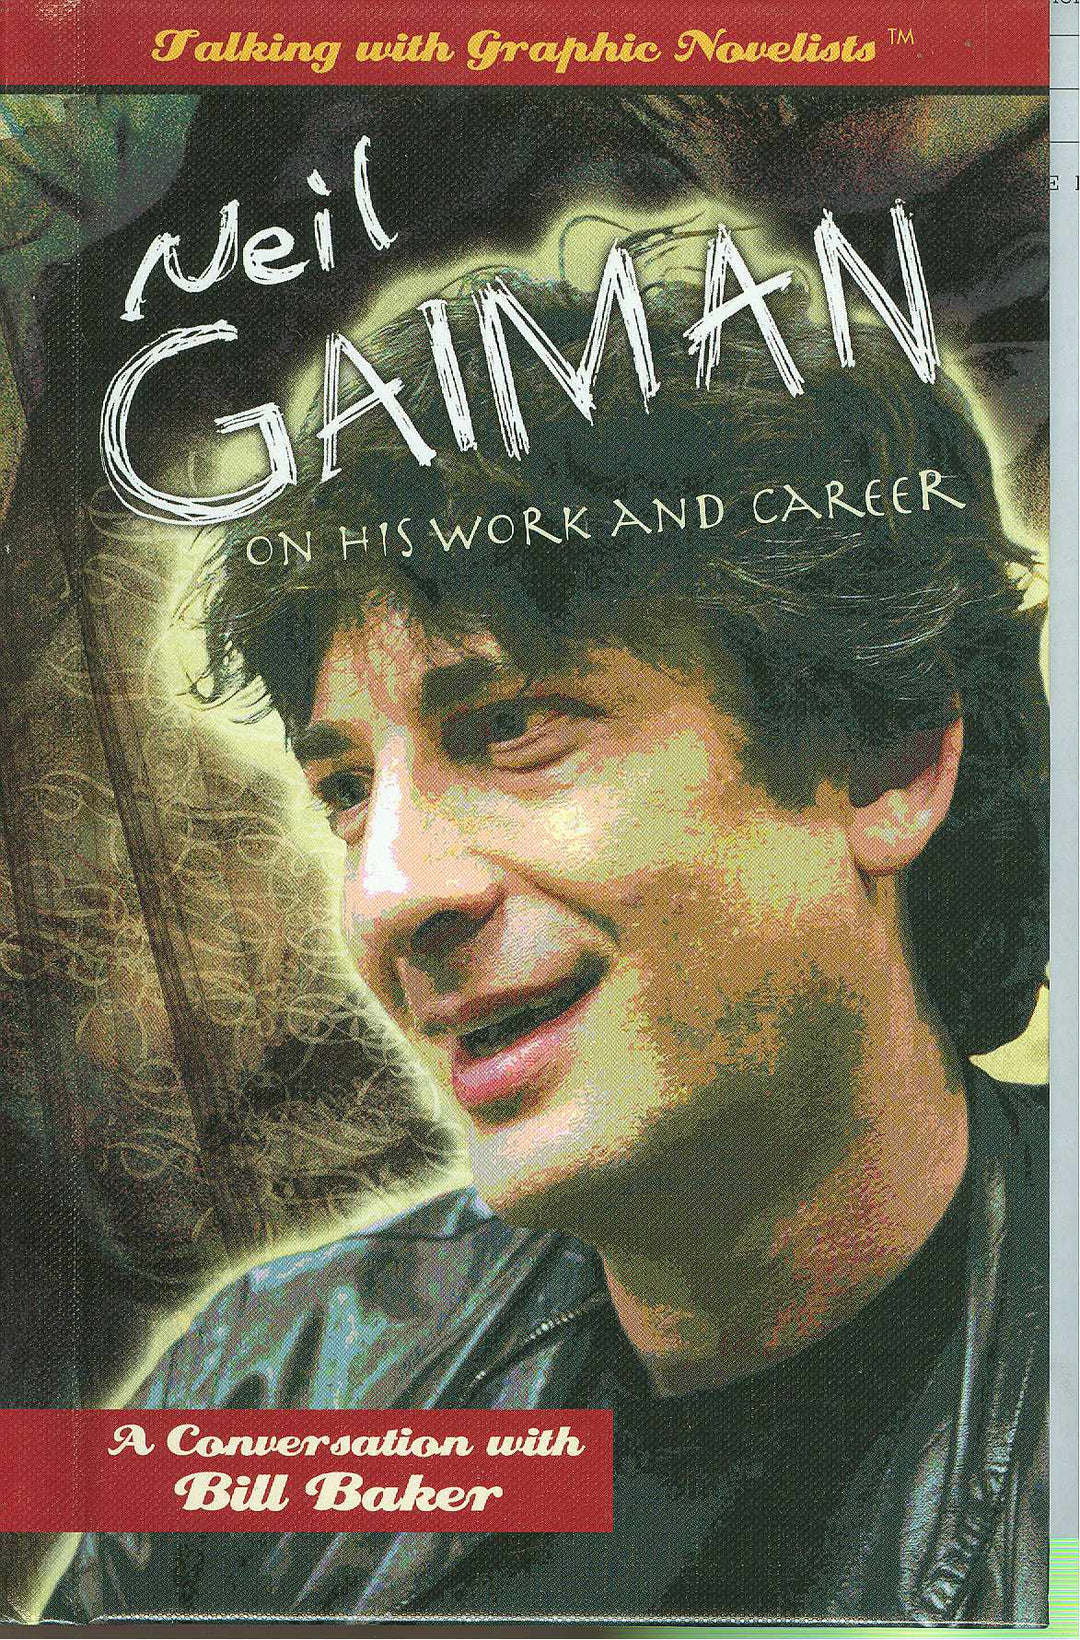 Neil Gaiman On His Work and Career Hardcover